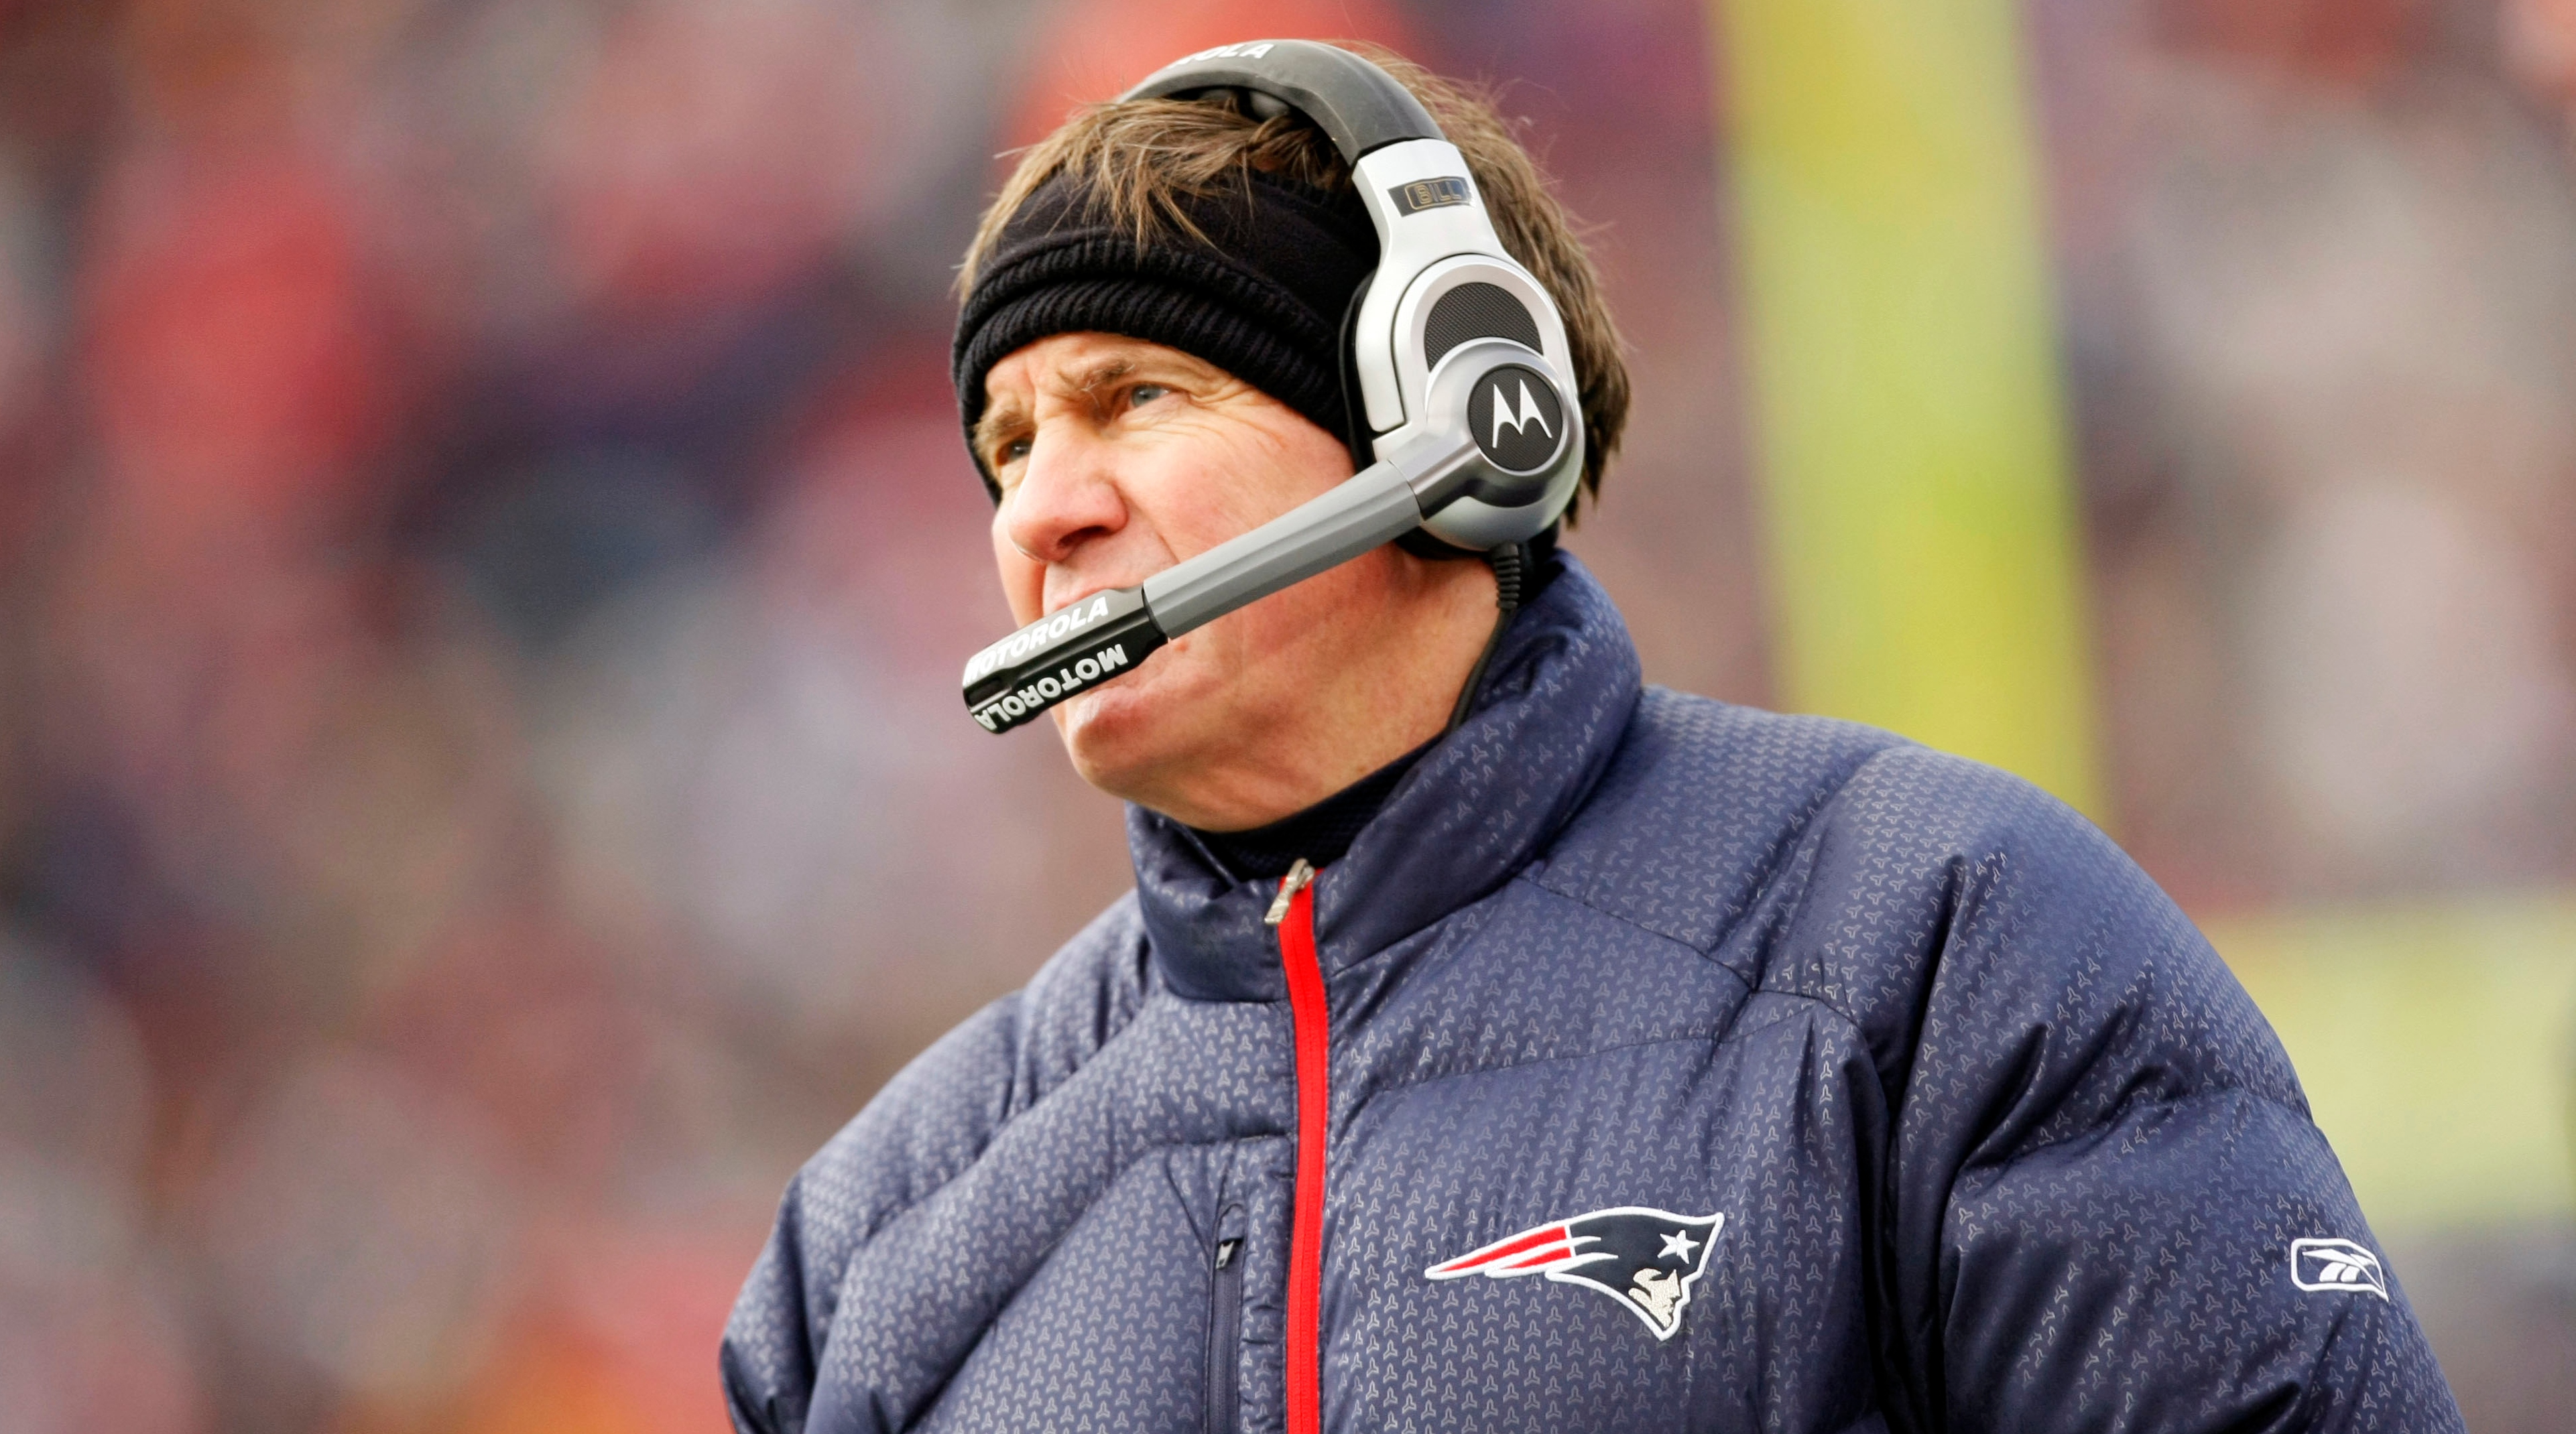 Patriots coach Bill Belichick looks on while wearing a headset during a game in the 2007 season.